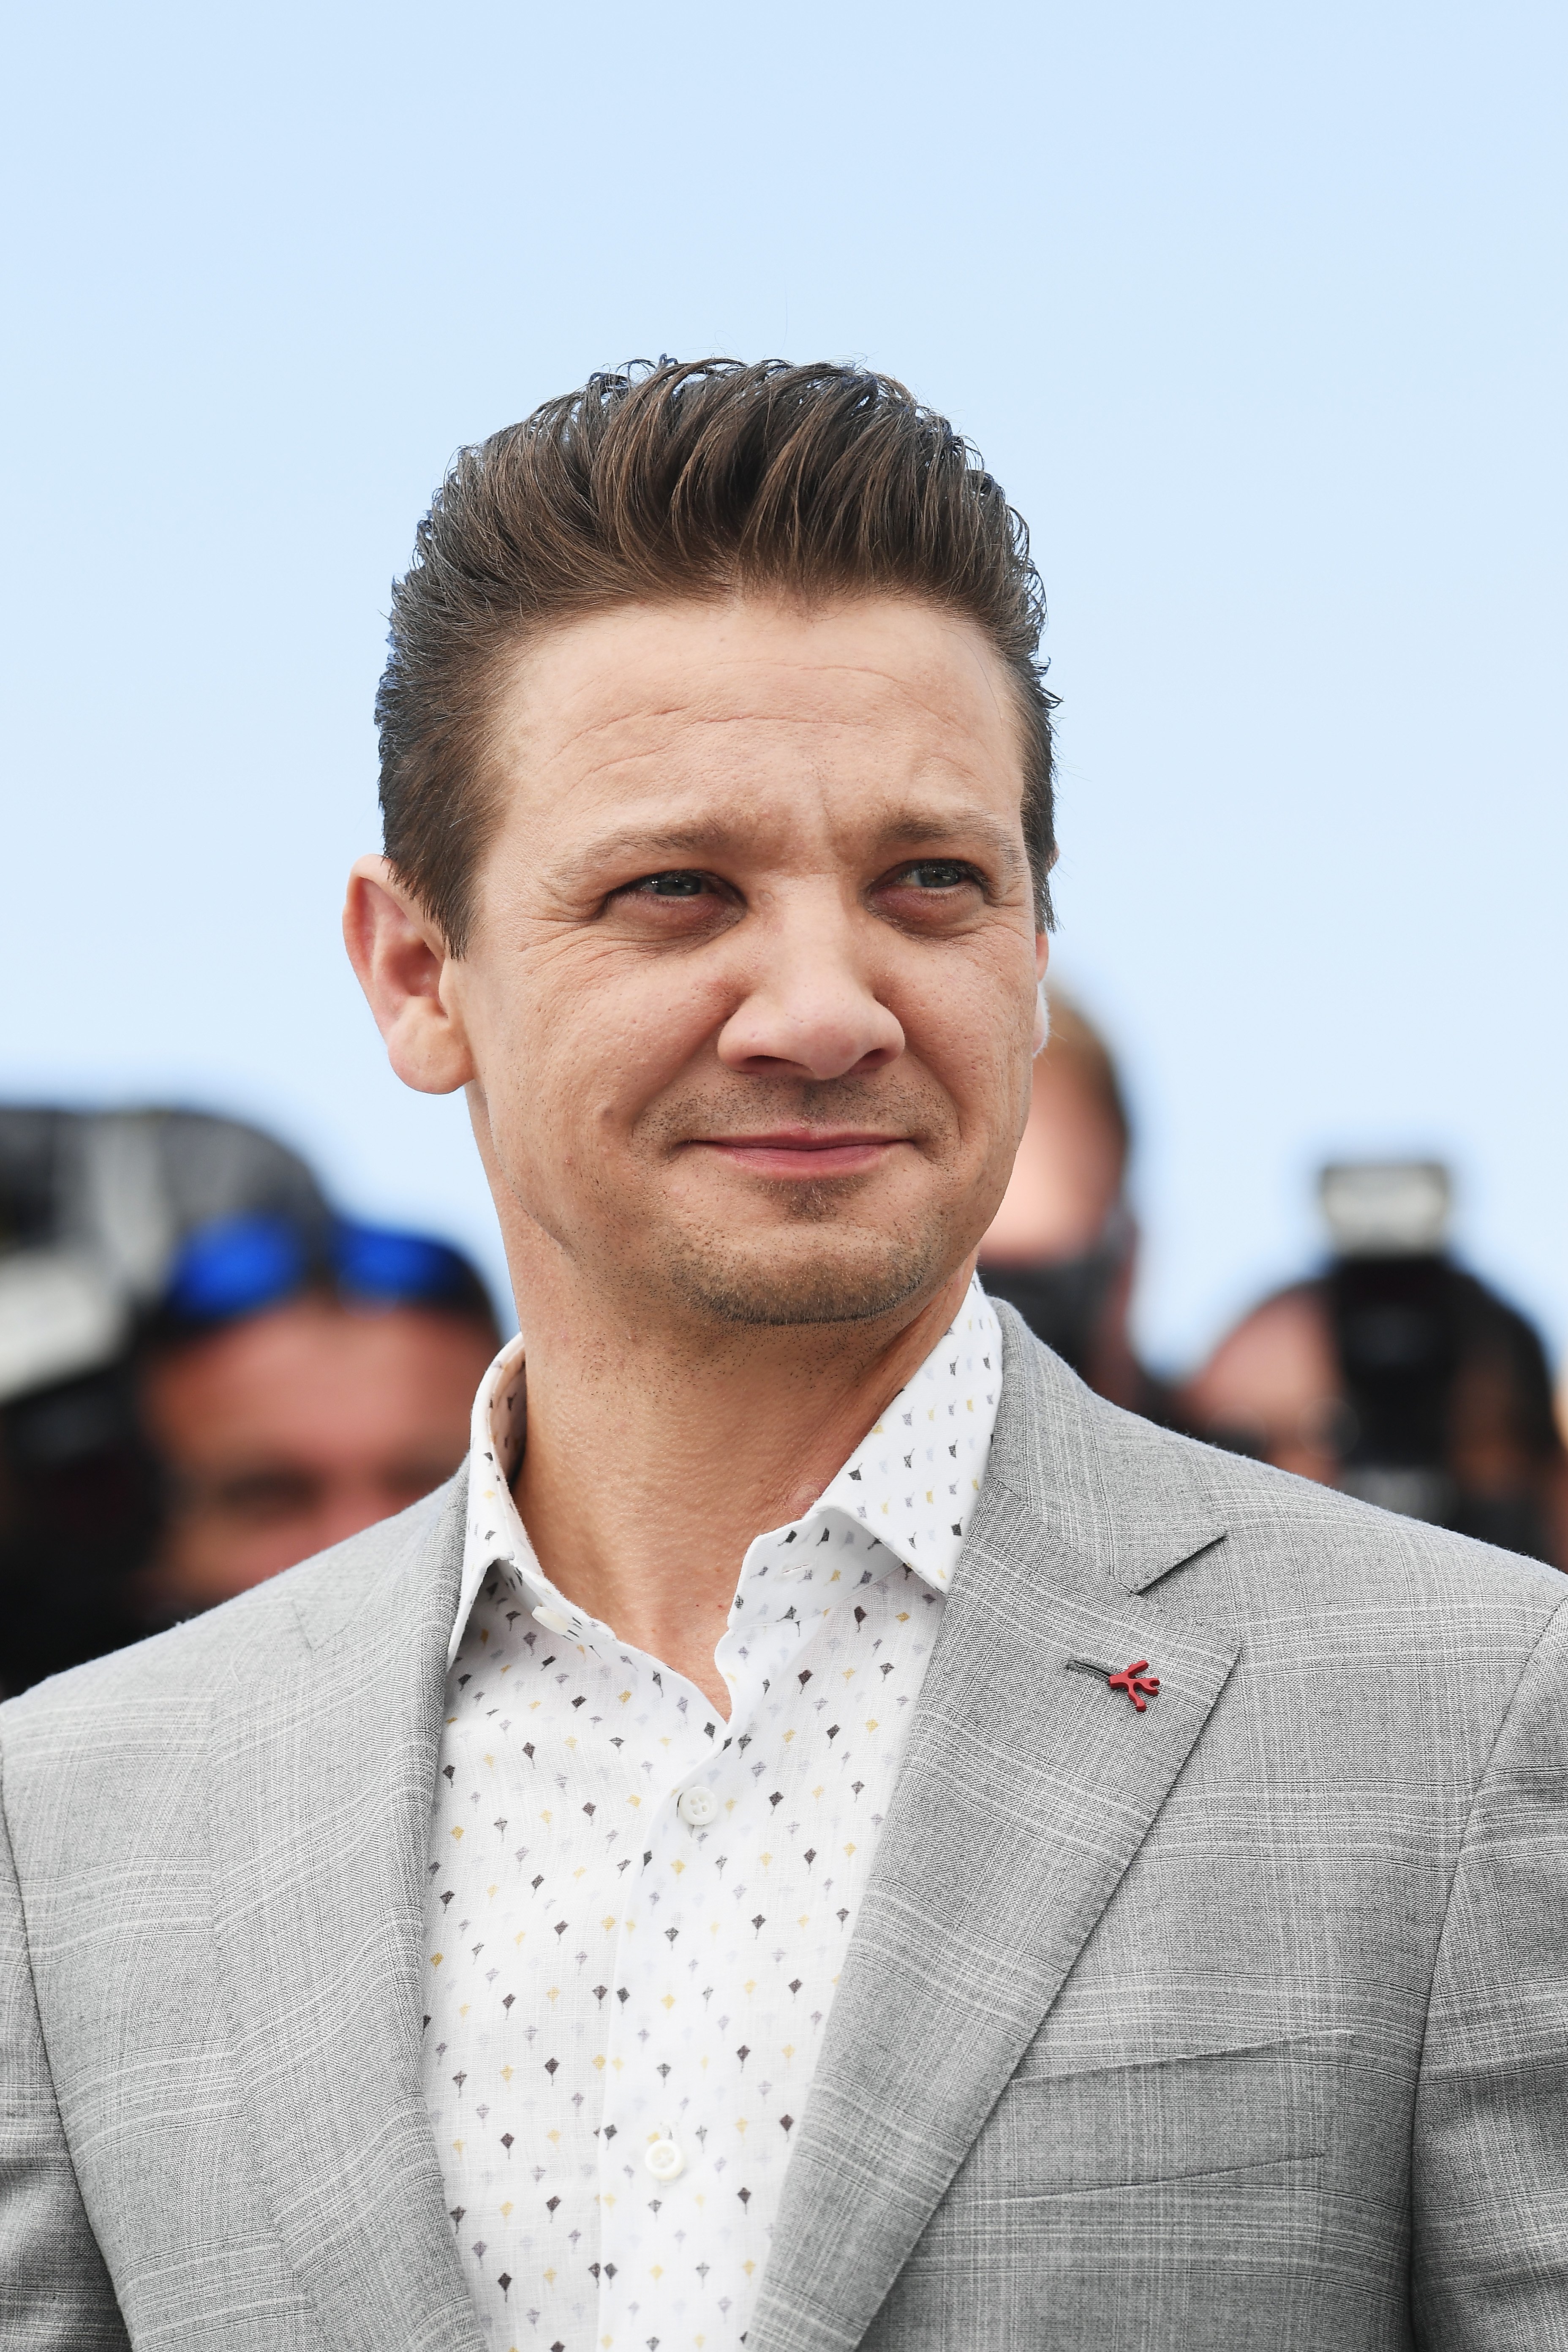 Jeremy Renner at the 70th annual Cannes Film Festival in Cannes, France | Photo: Getty Images